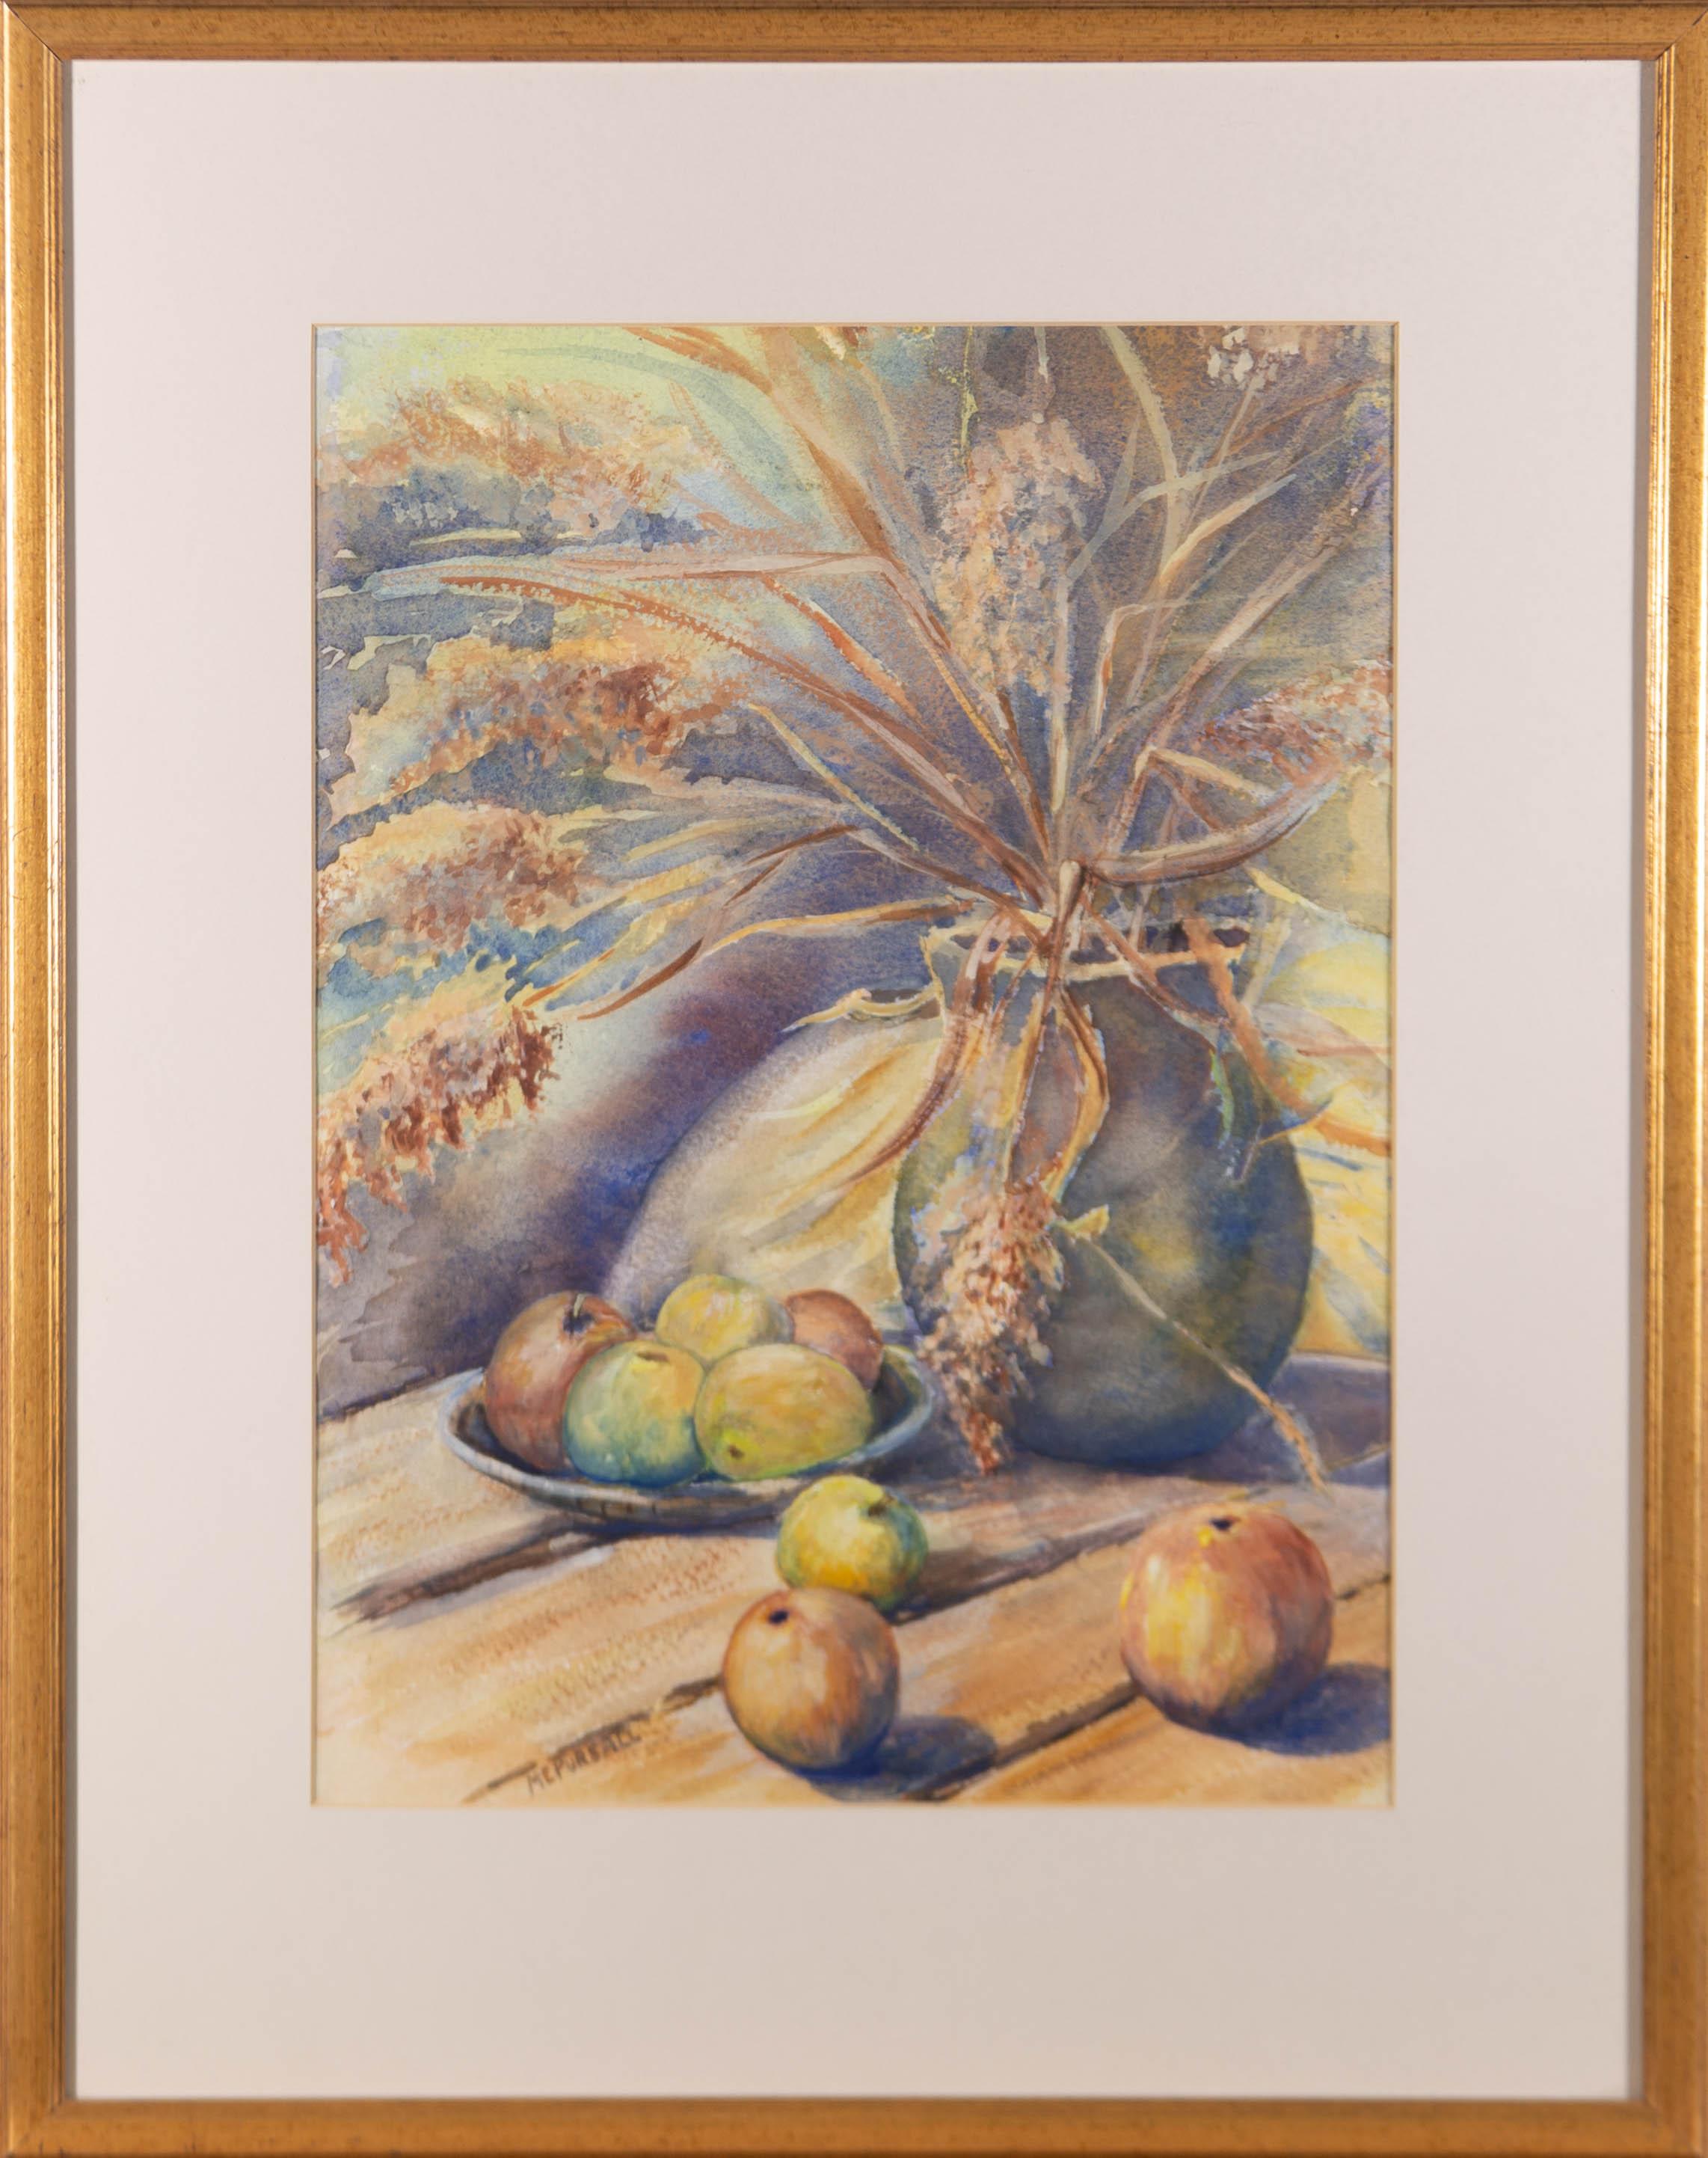 A fine and captivating watercolour painting with gouache details by Basil E. Pursall. The scene depicts a flower vase with red and green apples nearby. Singed to the lower margin. There is an artist's label to the reverse. Well-presented in a card